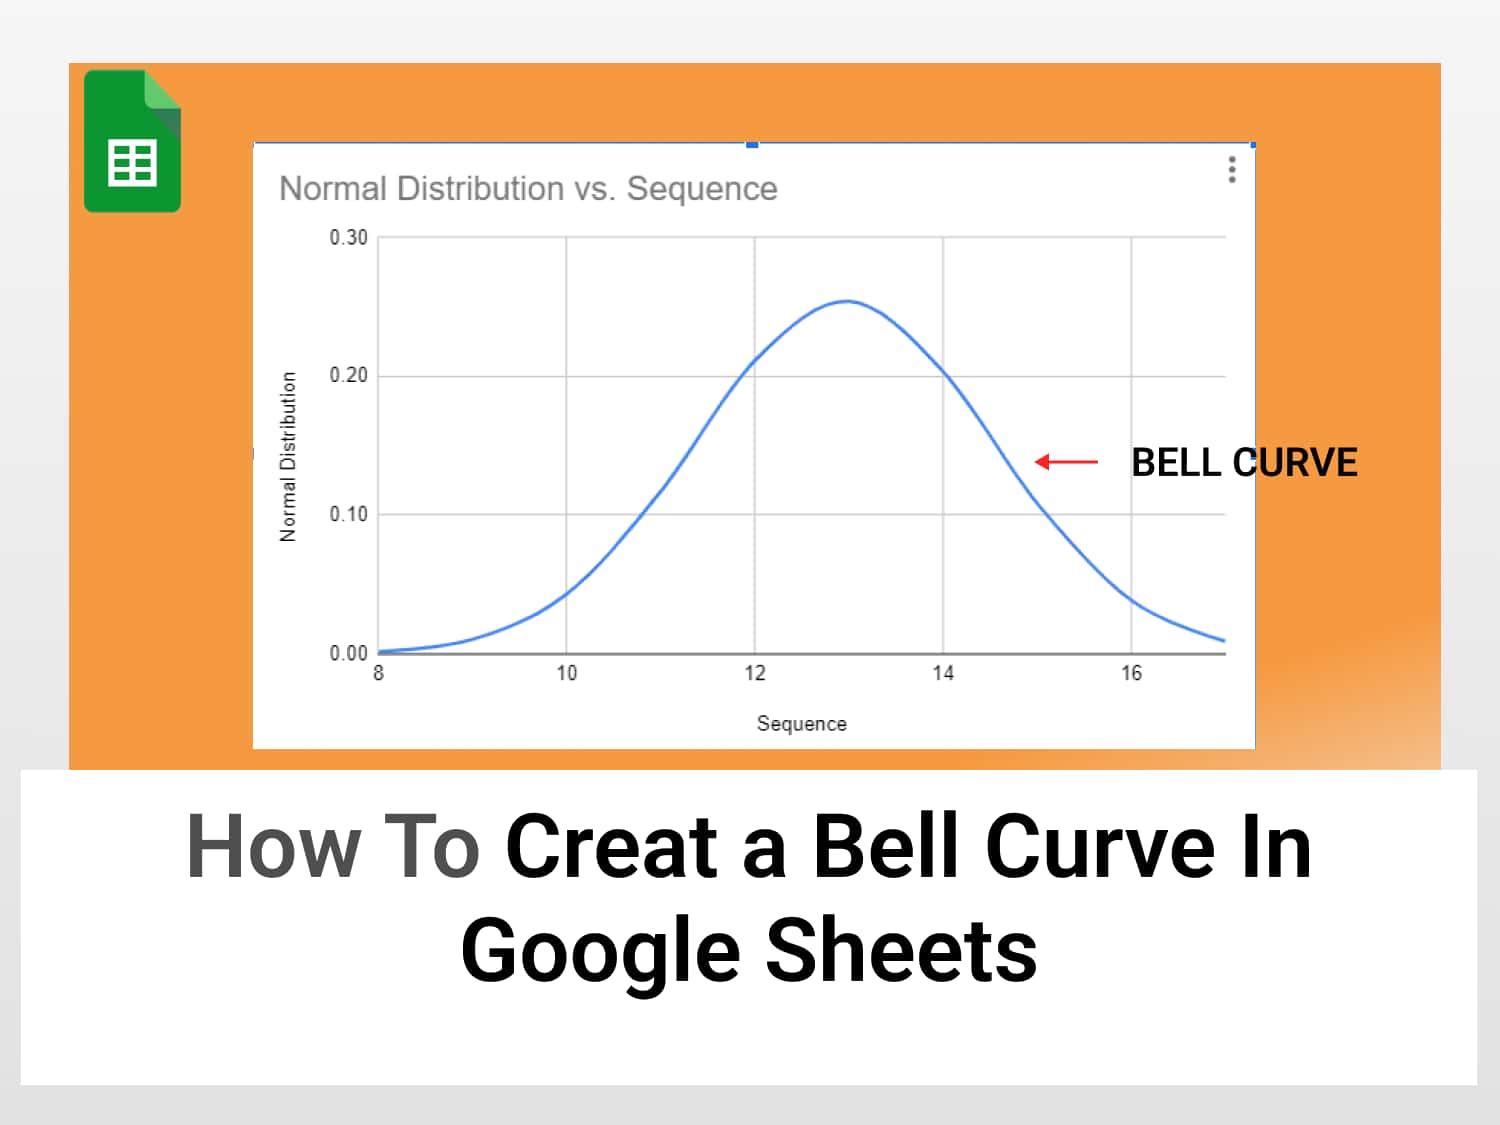 How to create a bell curve in Google Sheets